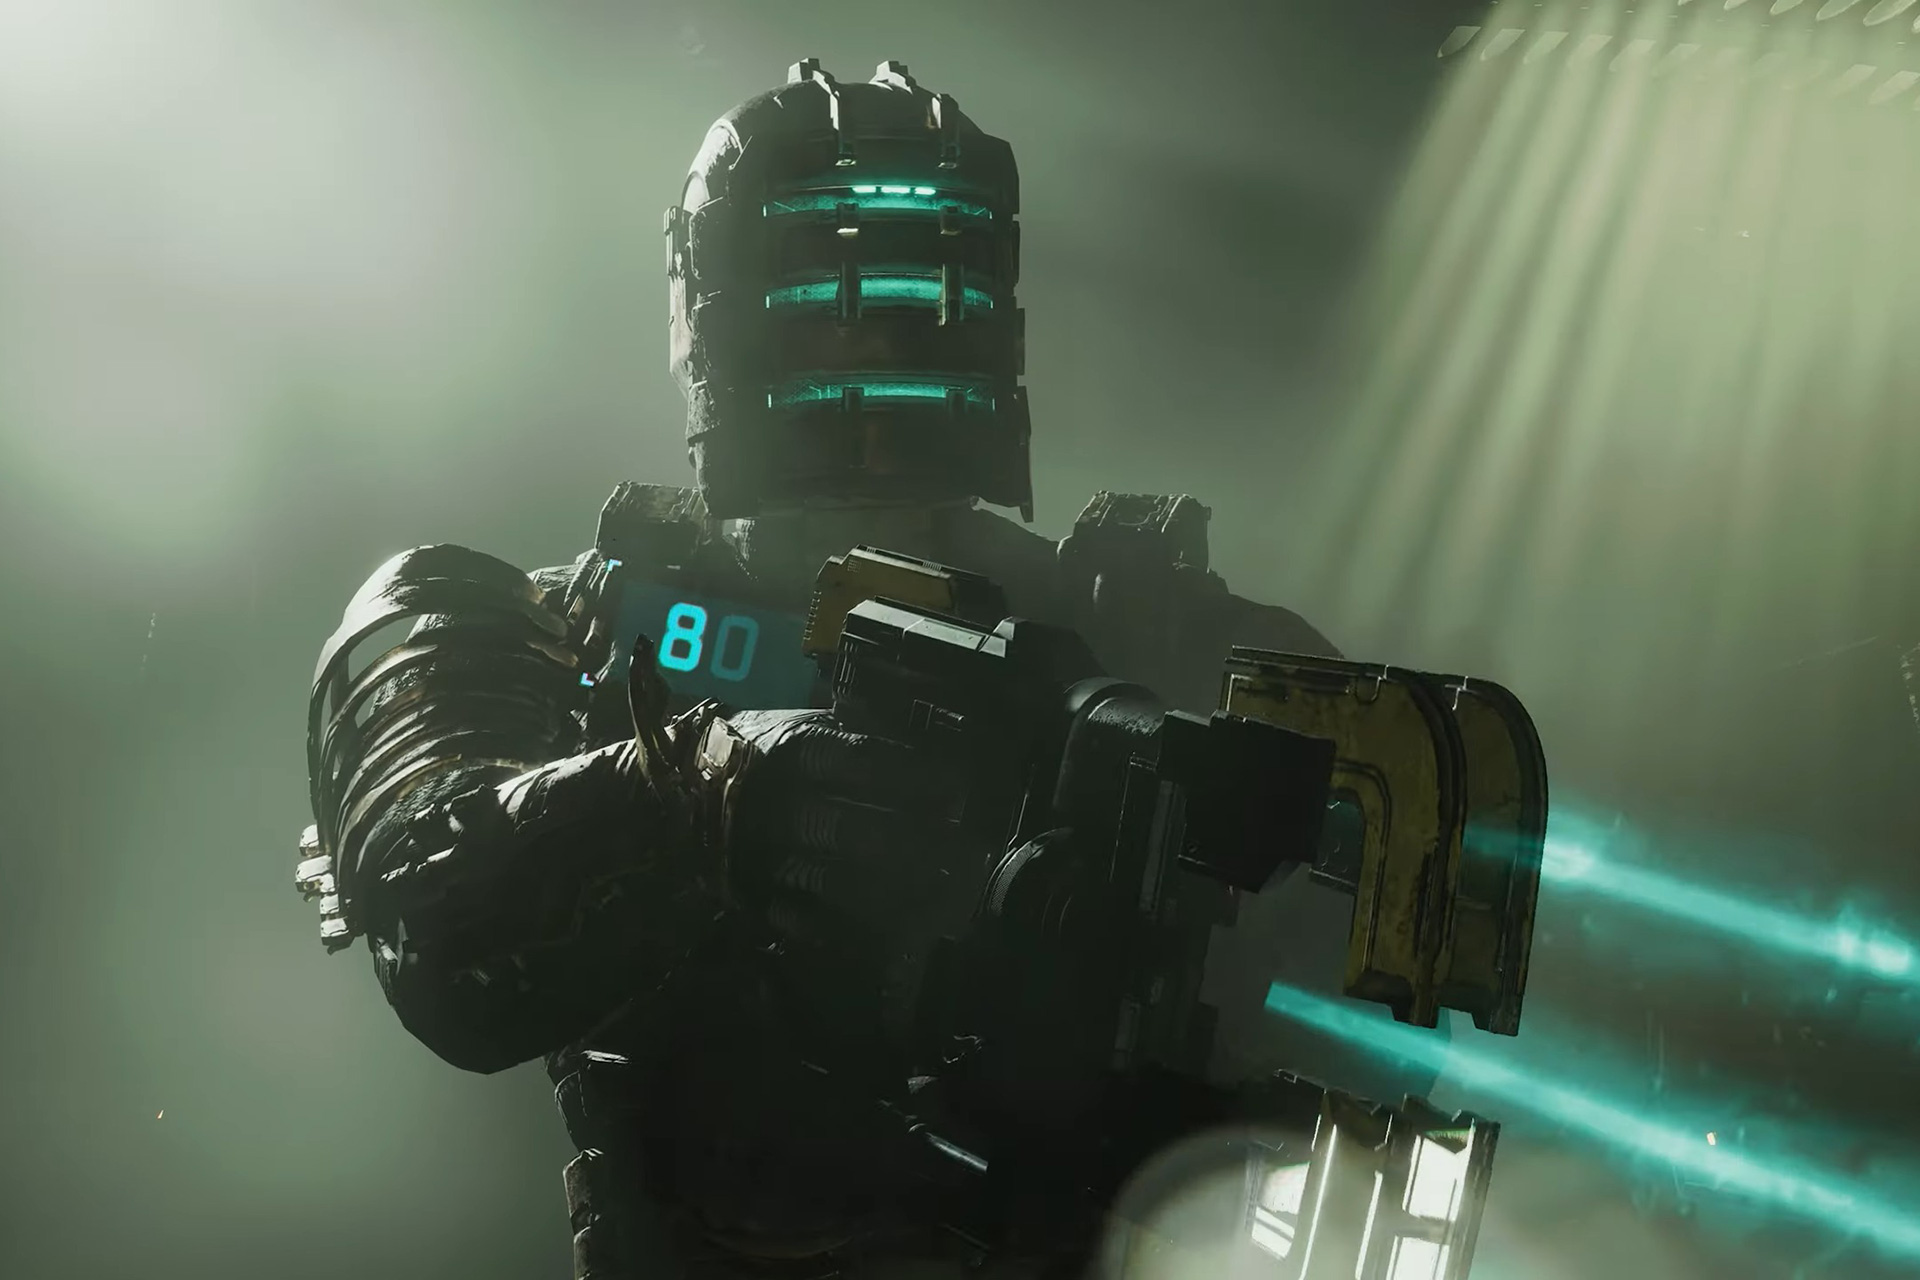 'Dead Space' remake trailer shows a twist on familiar gameplay